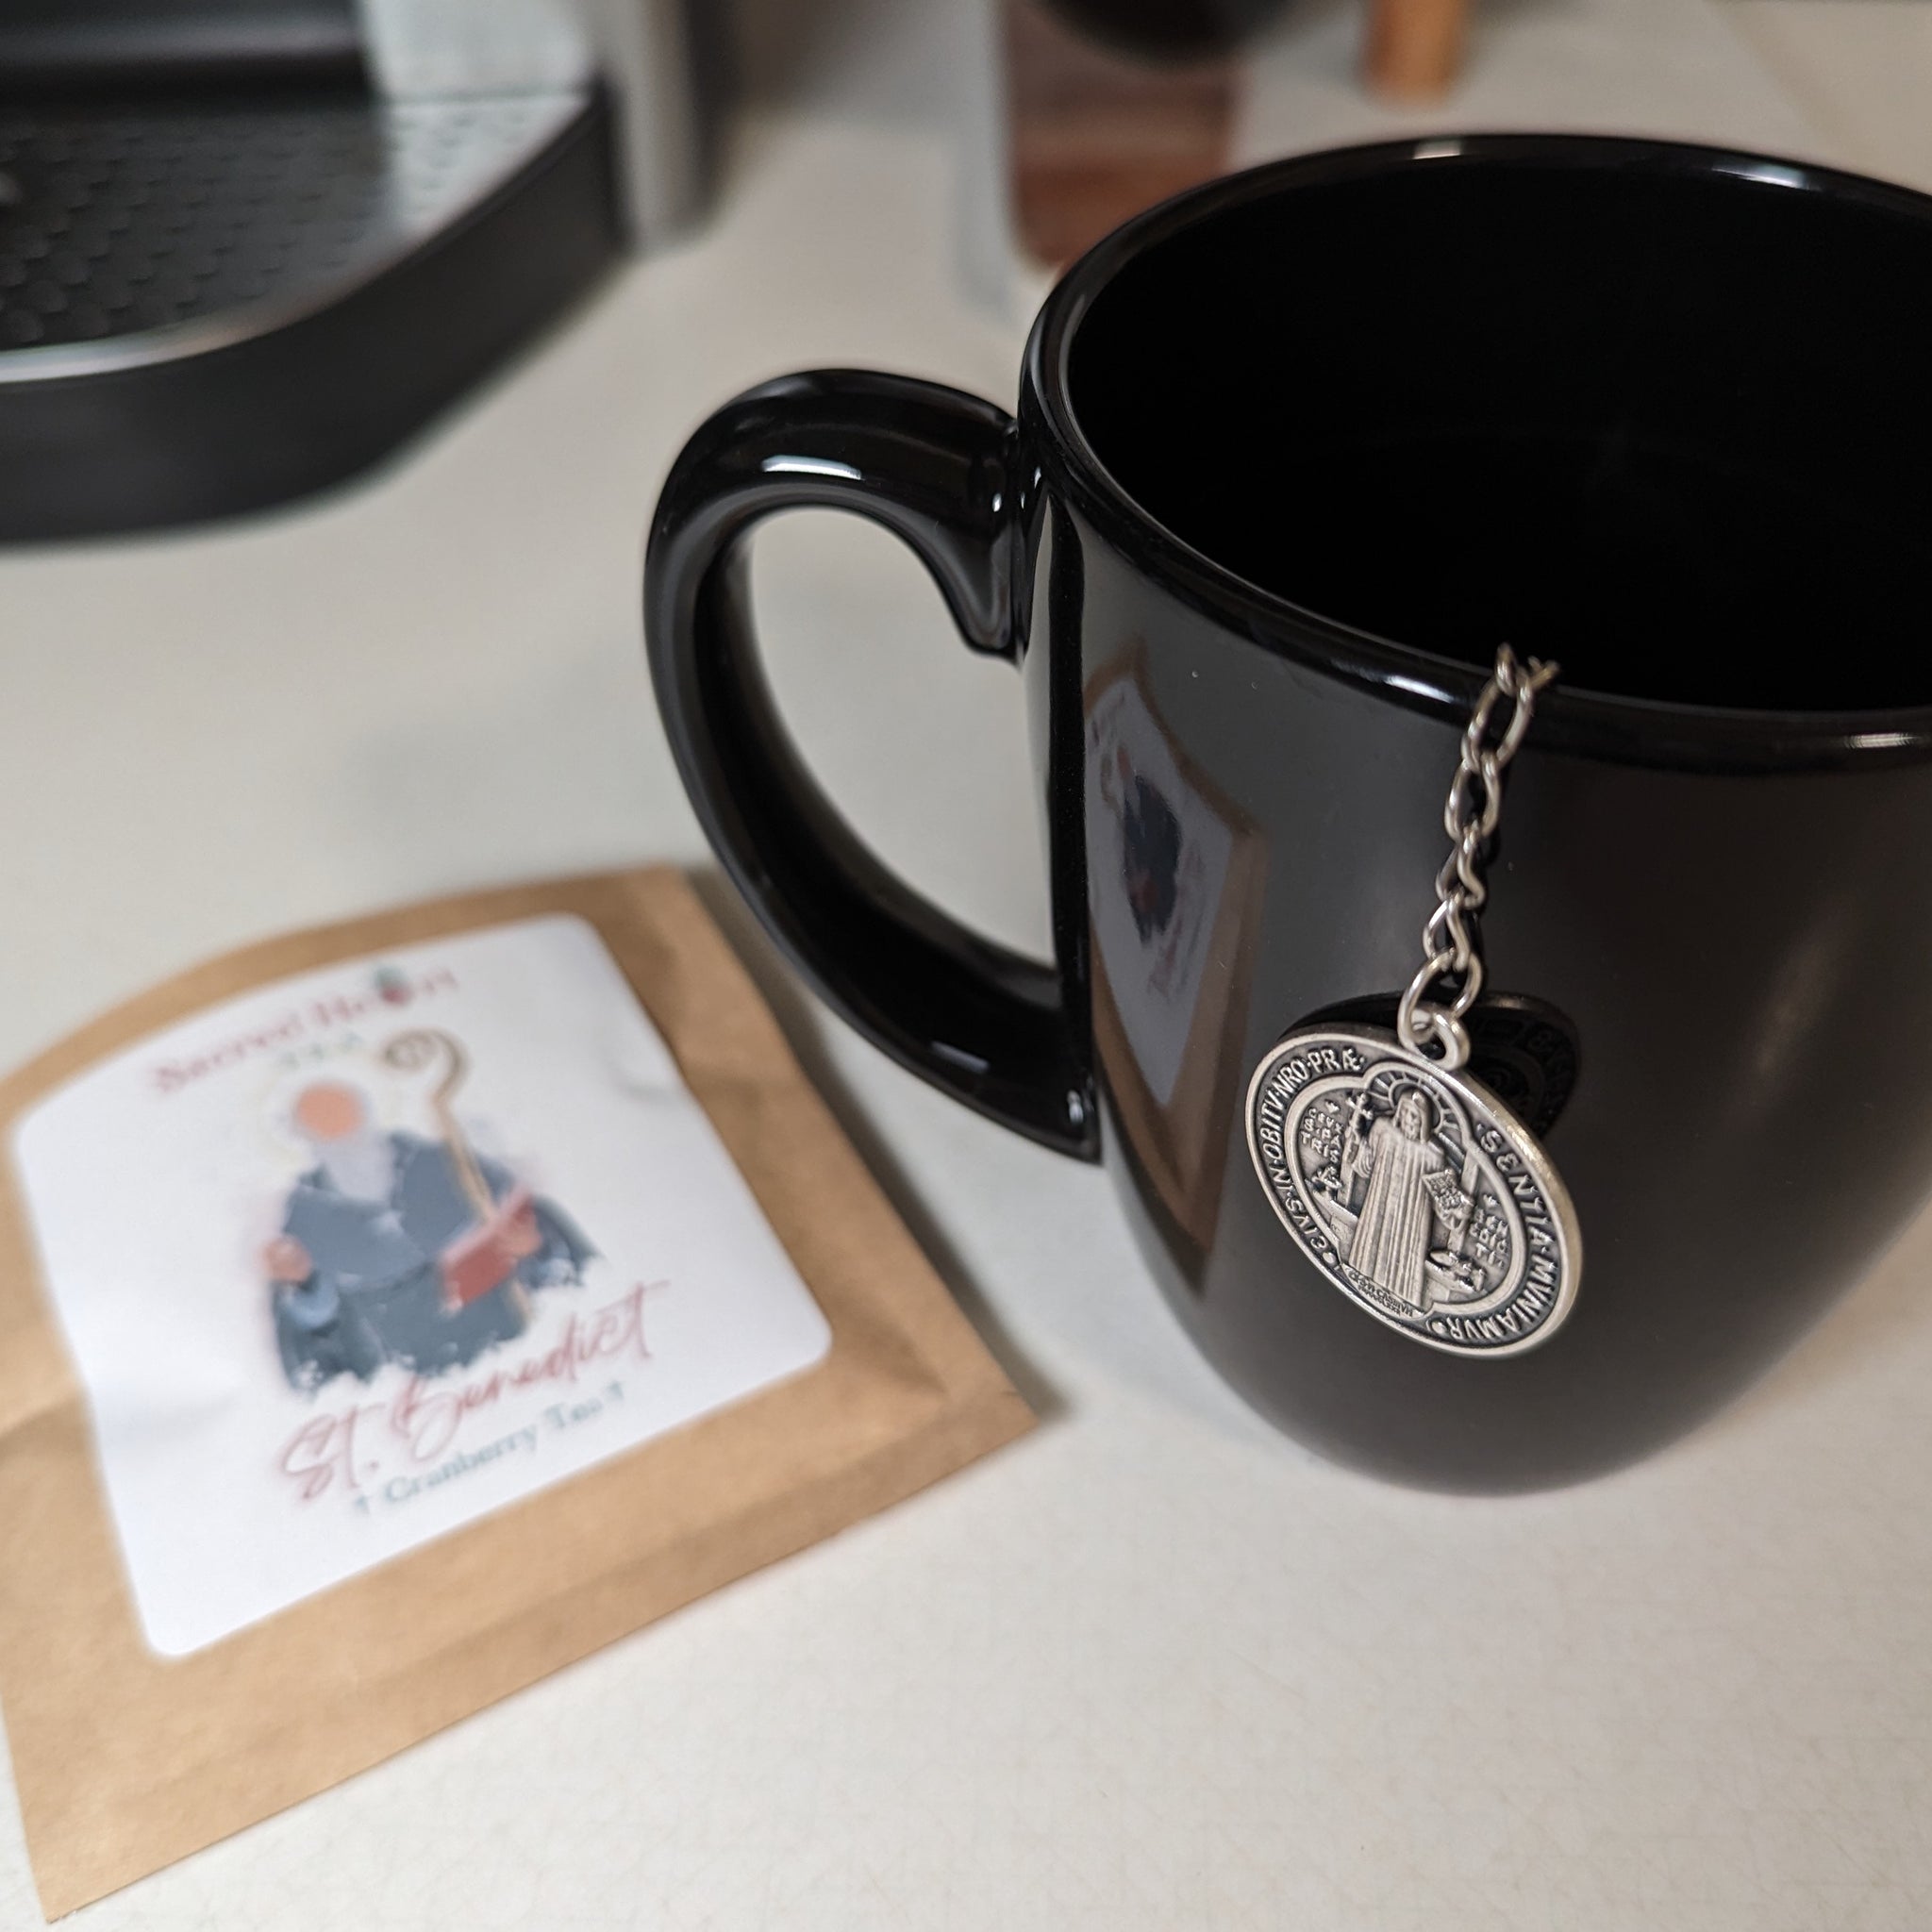 Mug with a Catholic St. Benedict medal tea infuser shown off the side of the mug.